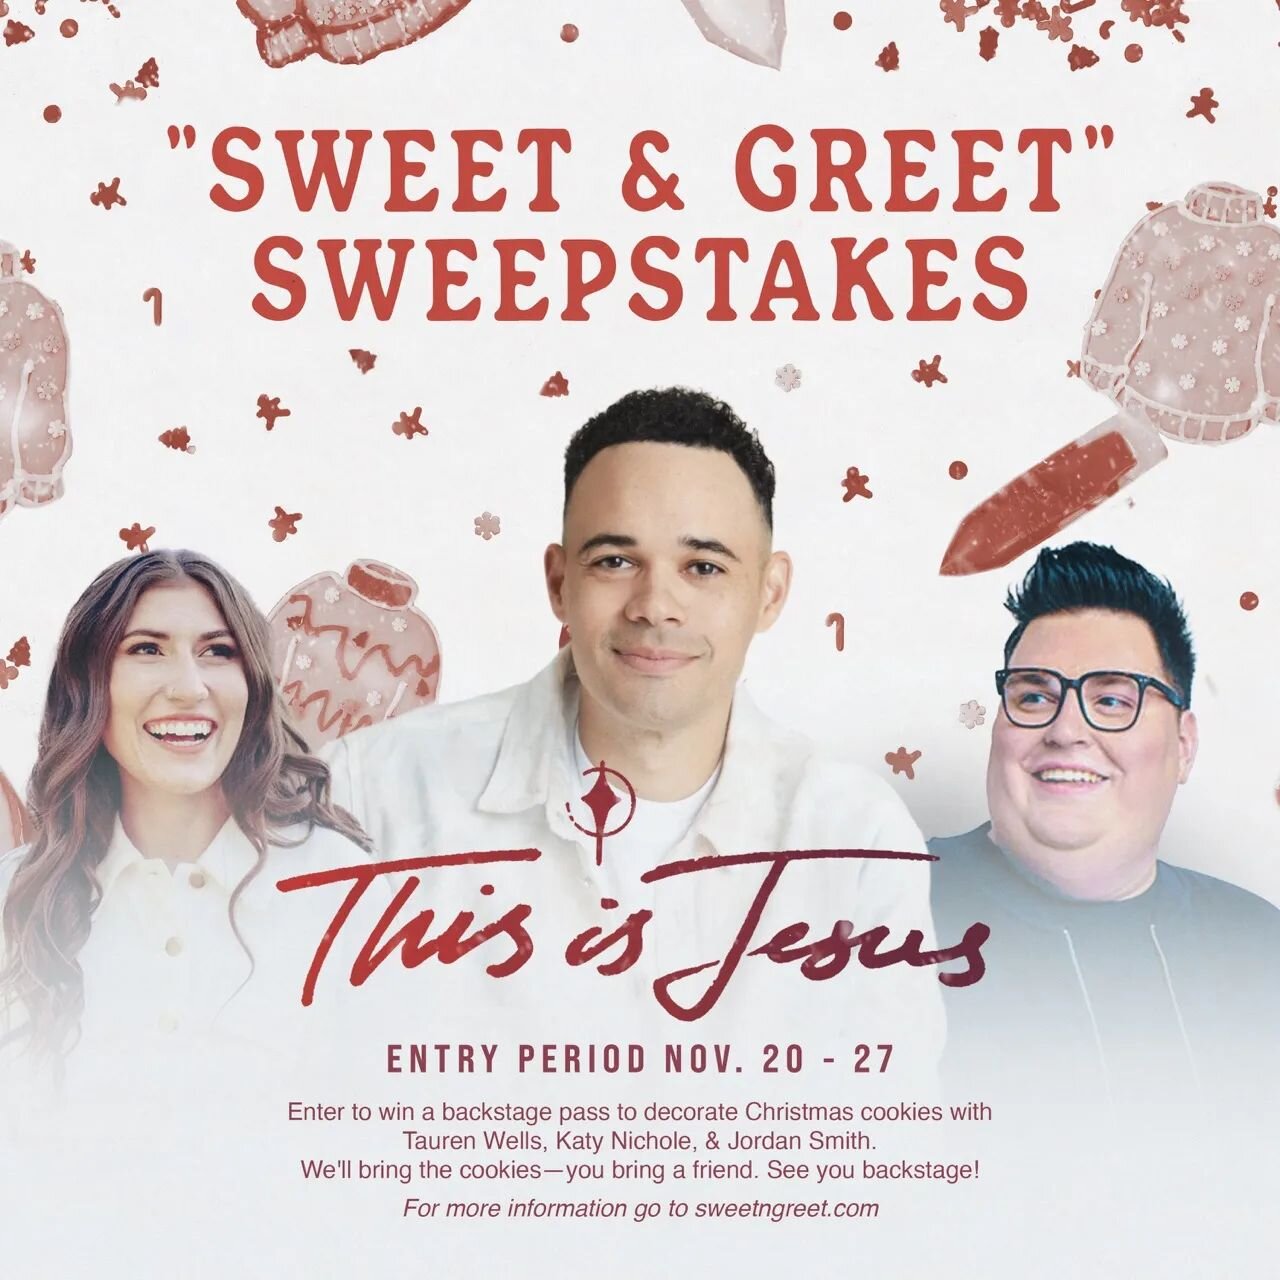 Cyber Monday deal is here!! Buy tickets before 11:59pm CST on Nov. 27 to be entered to win backstage passes to decorate Christmas cookies with Tauren Wells, Katy Nichole, &amp; Jordan Smith! Details at sweetNgreet.com.

To sweeten the deal, use promo